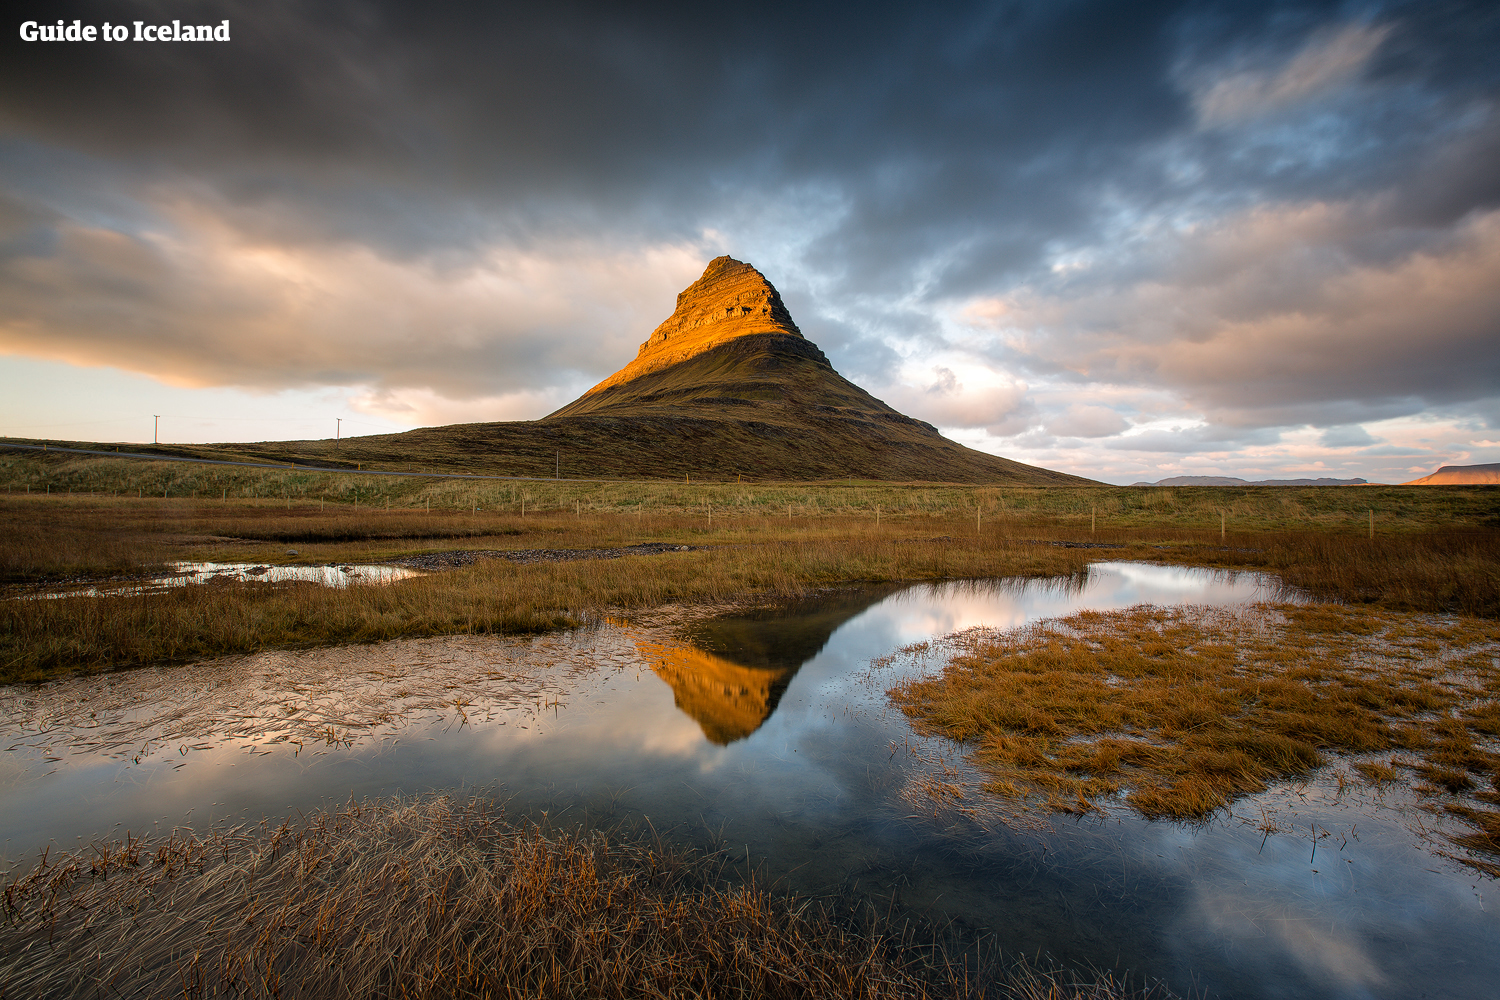 Mt. Kirkjufell is a natural oddity in West Iceland that deserves a visit.